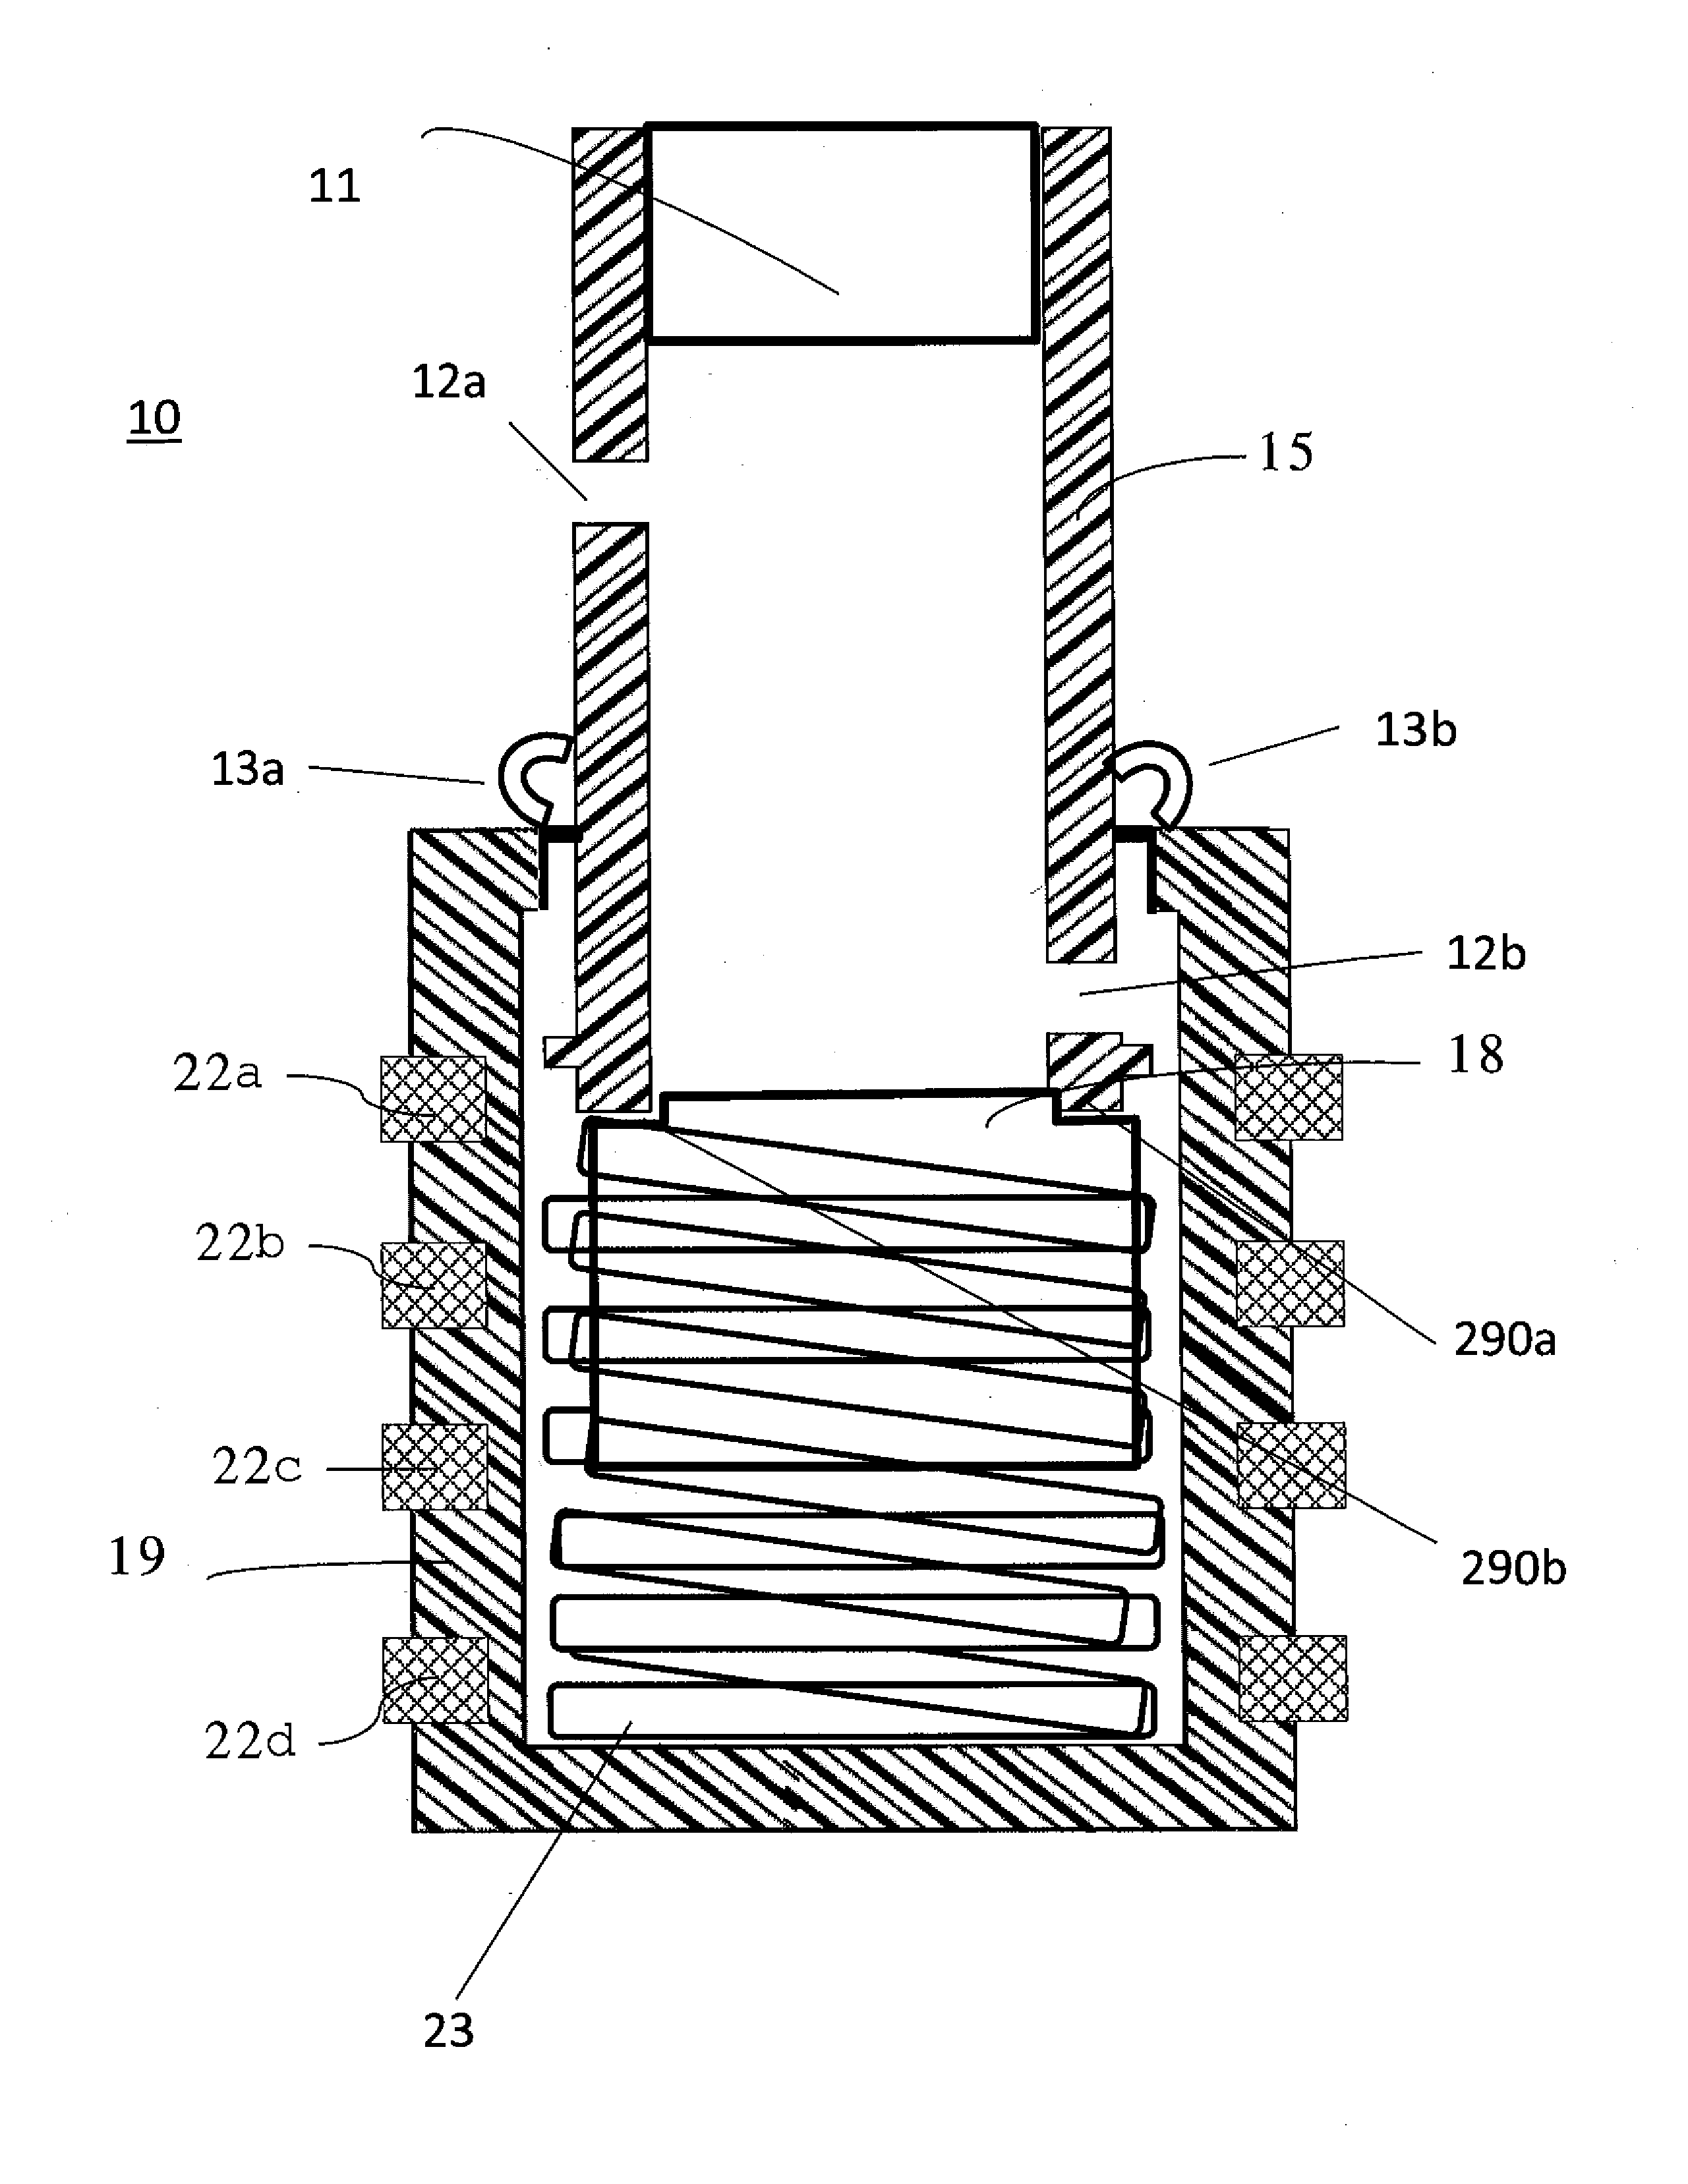 Fluid analysis device and related method